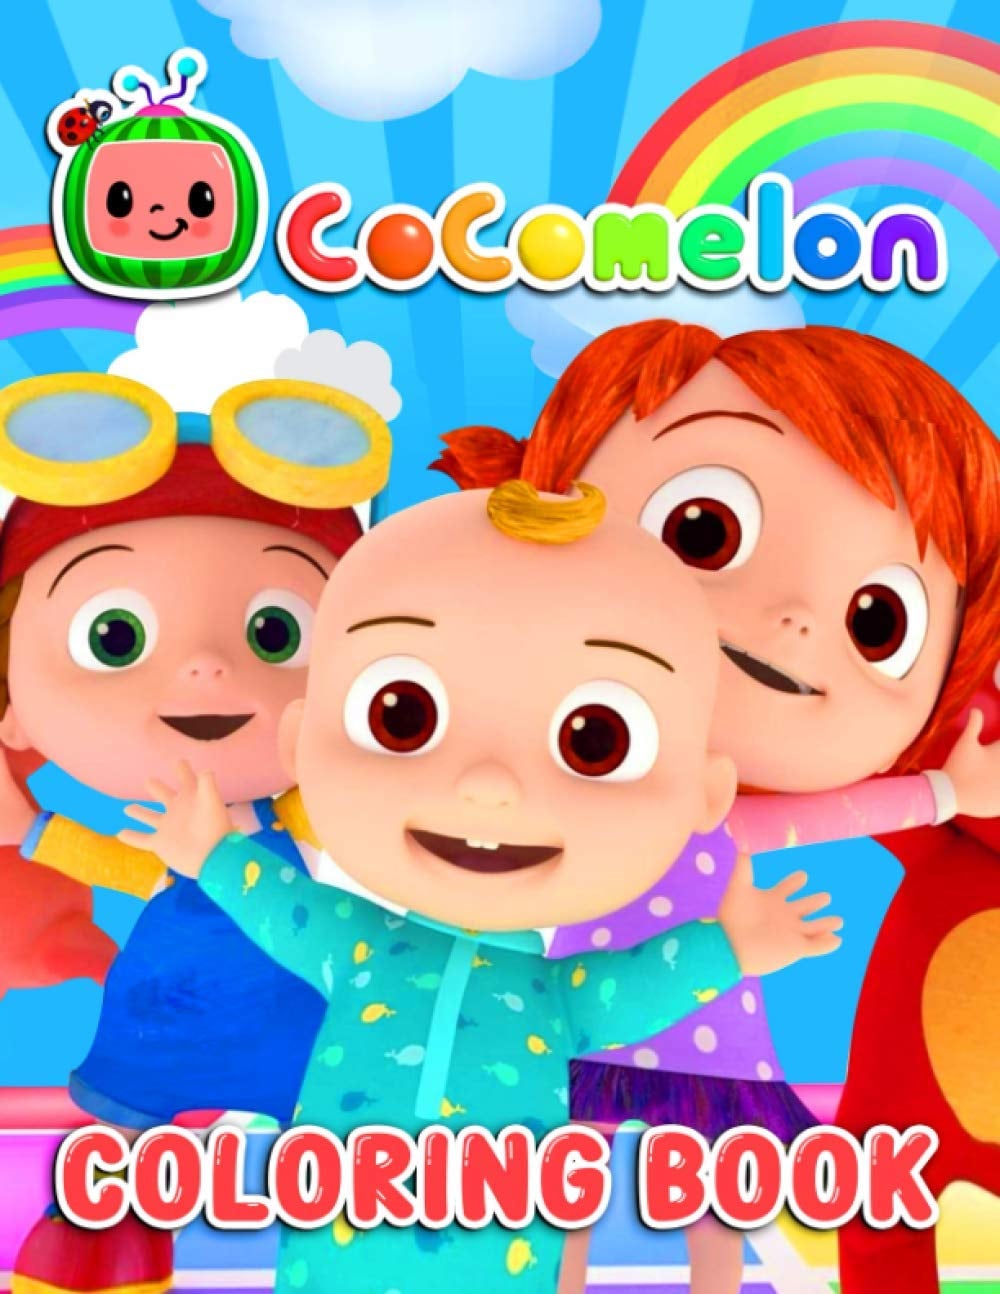 CoComelon Colouring Book  30 Adorable Products for Your CoComelon